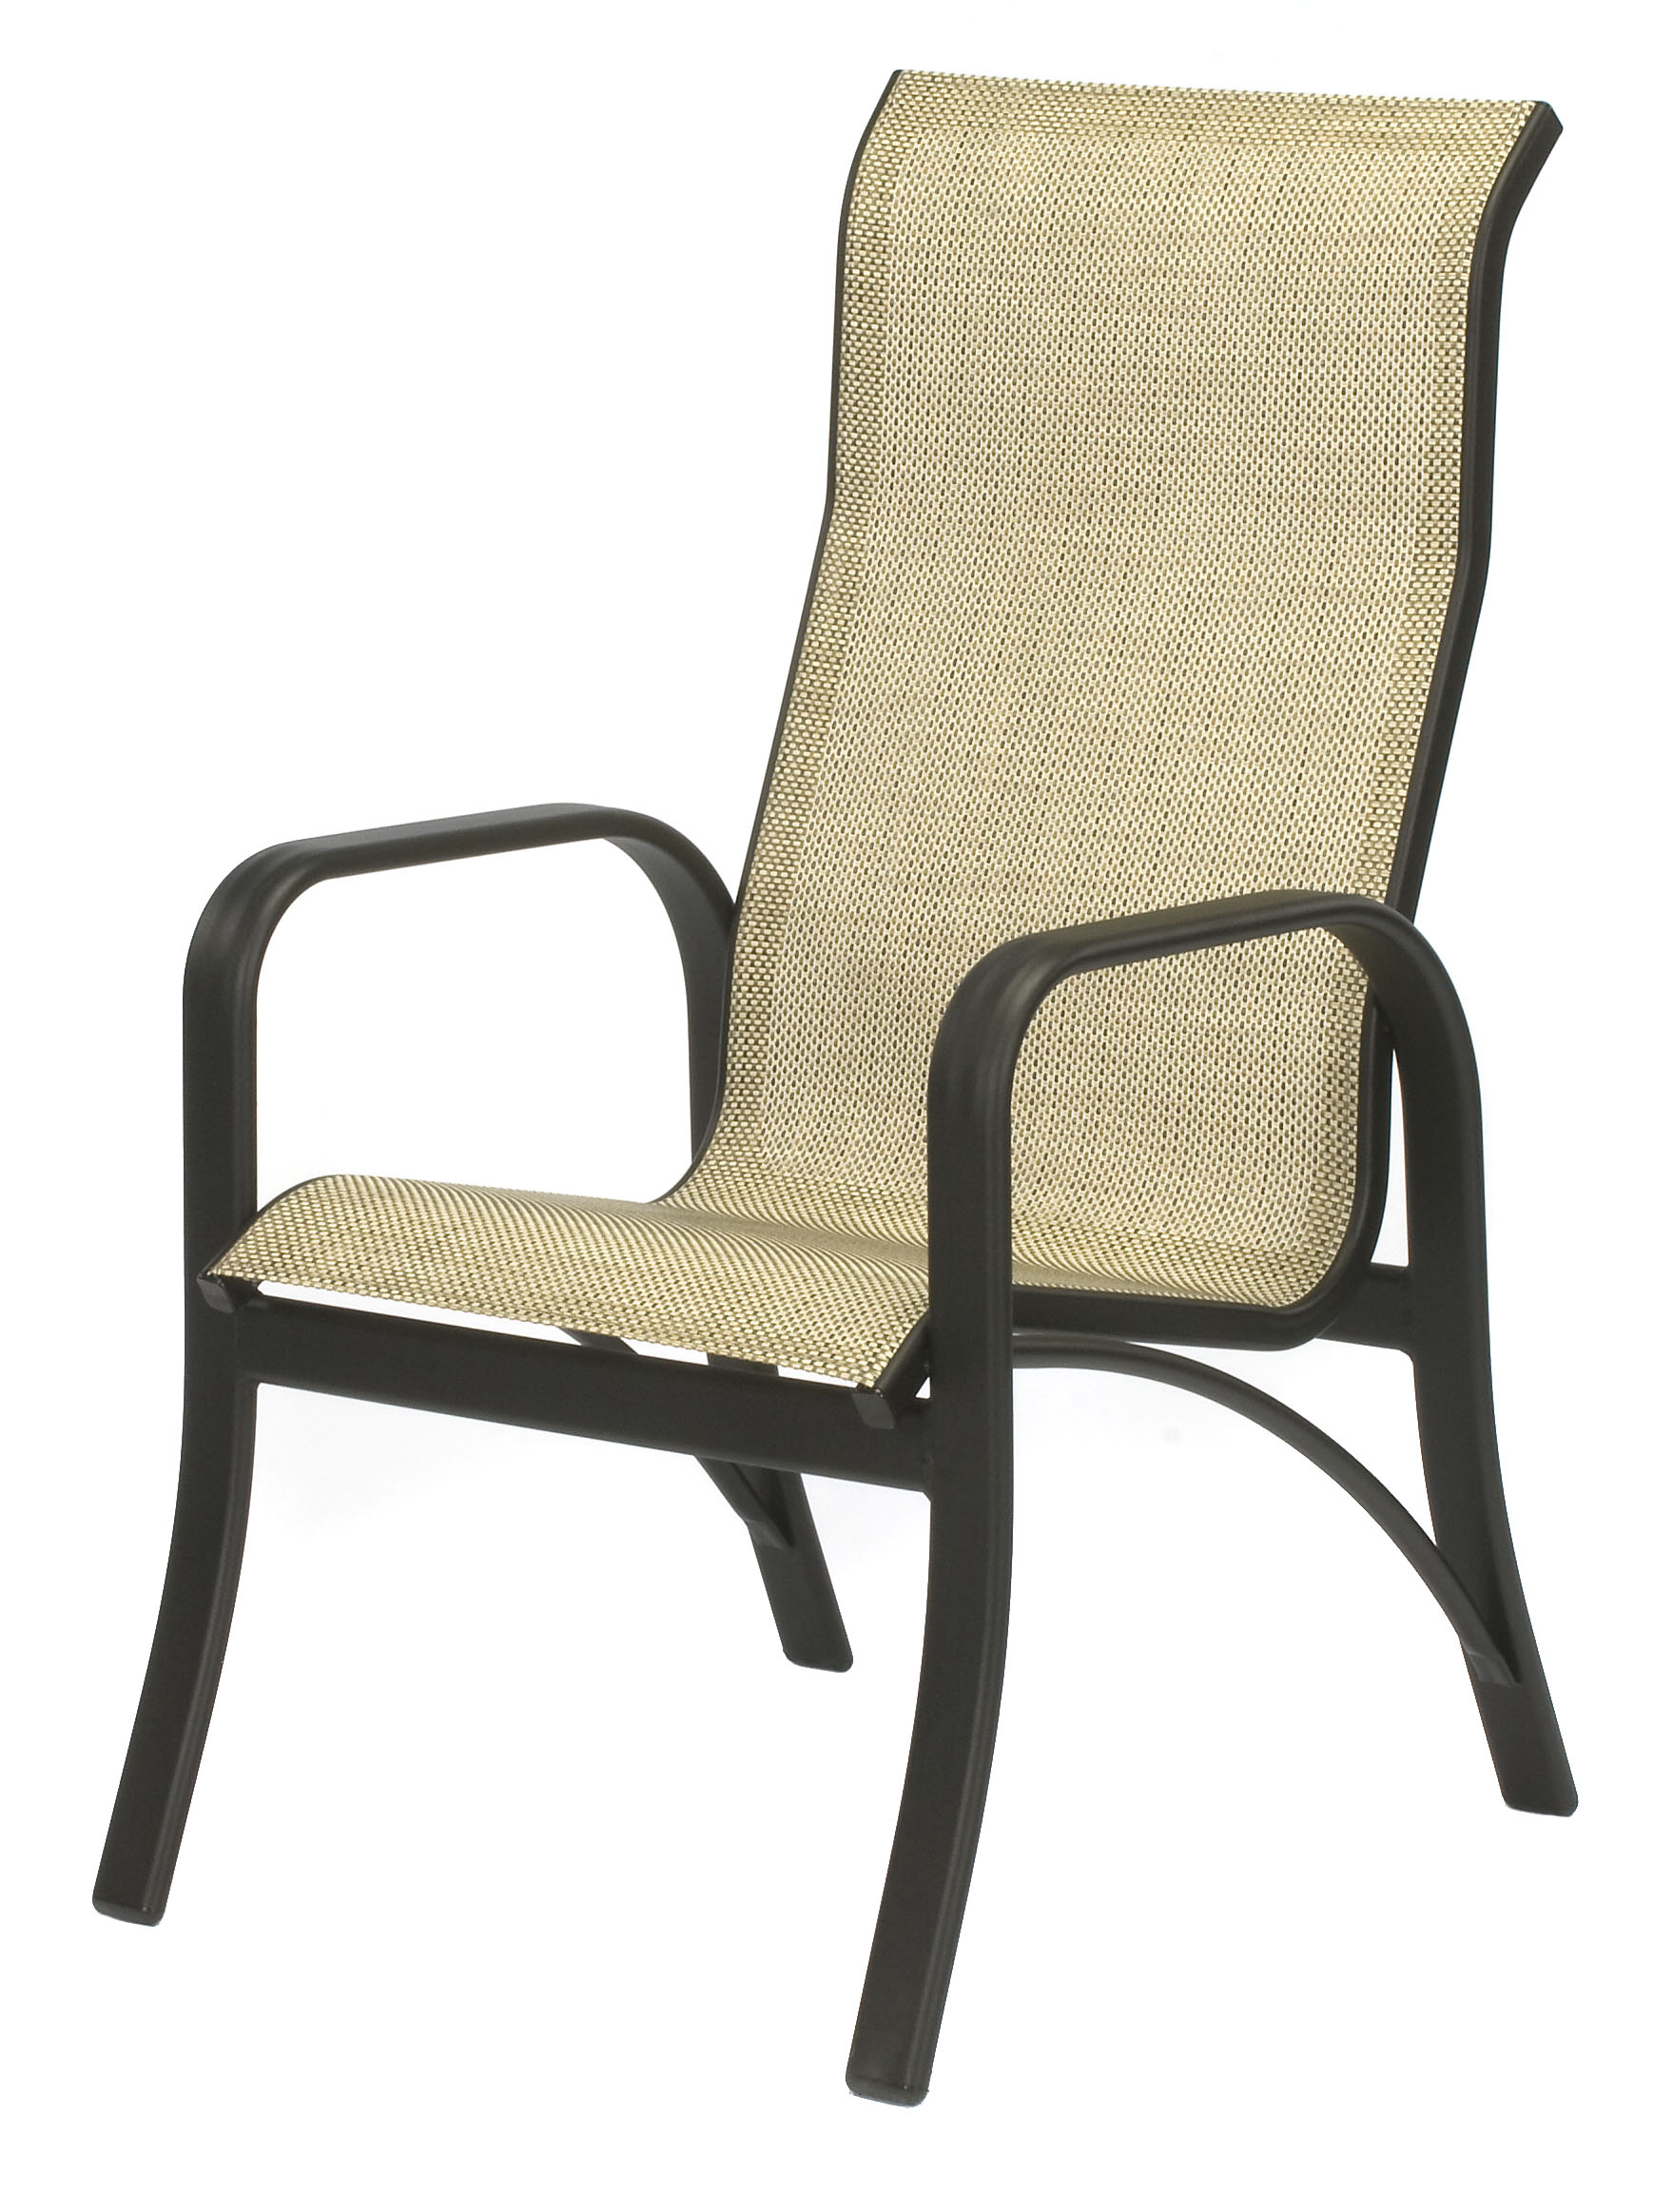 Tan Sling Patio Chair Unique Popular Of High Back Patio Chair ...